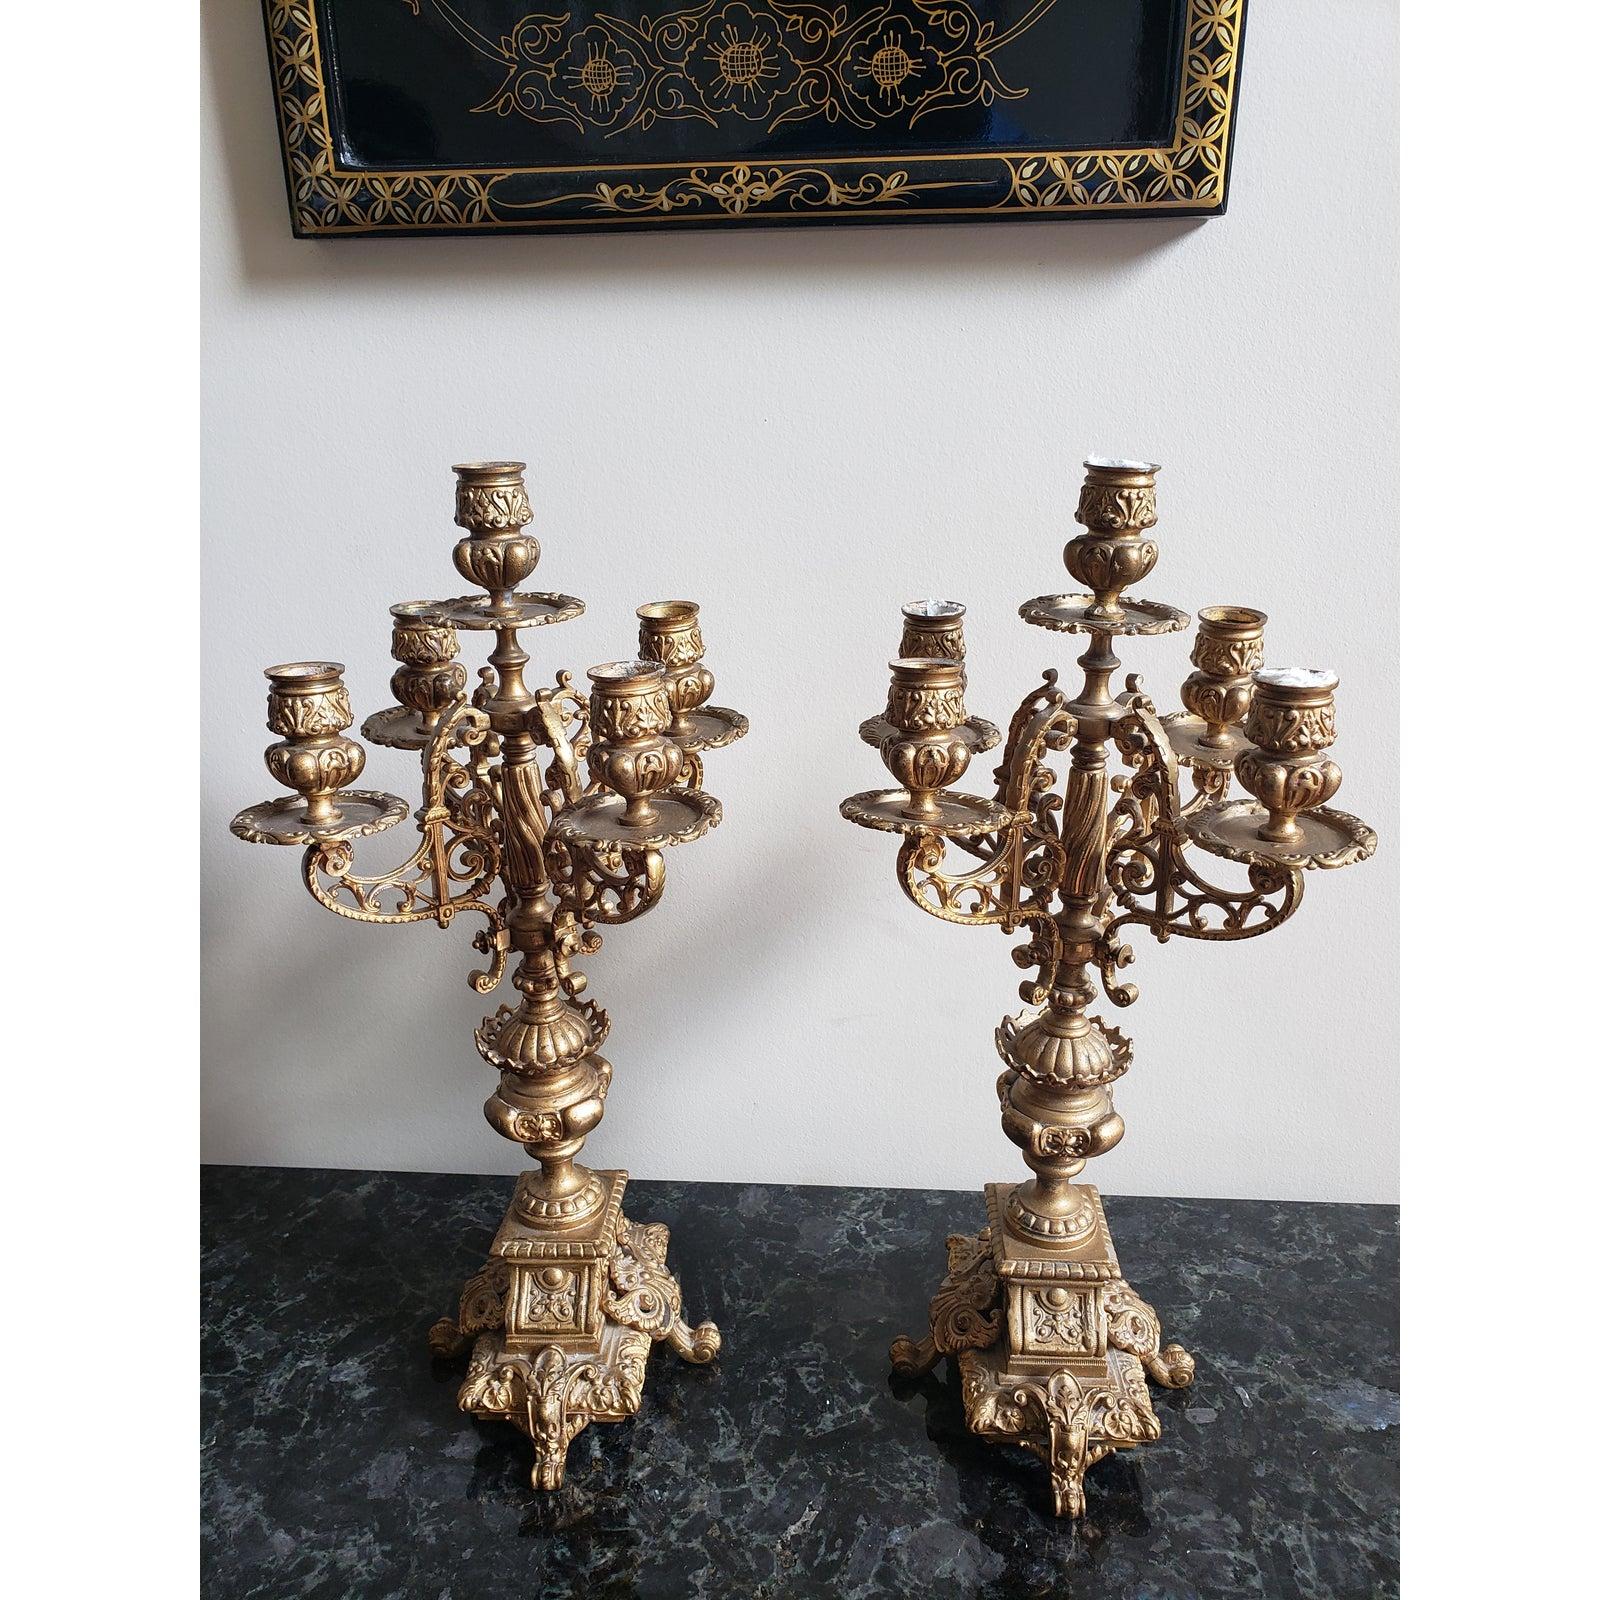 20th Century 1930s Italian Rococo 5 Arm Gilted Bronze Candelabras, a Pair For Sale